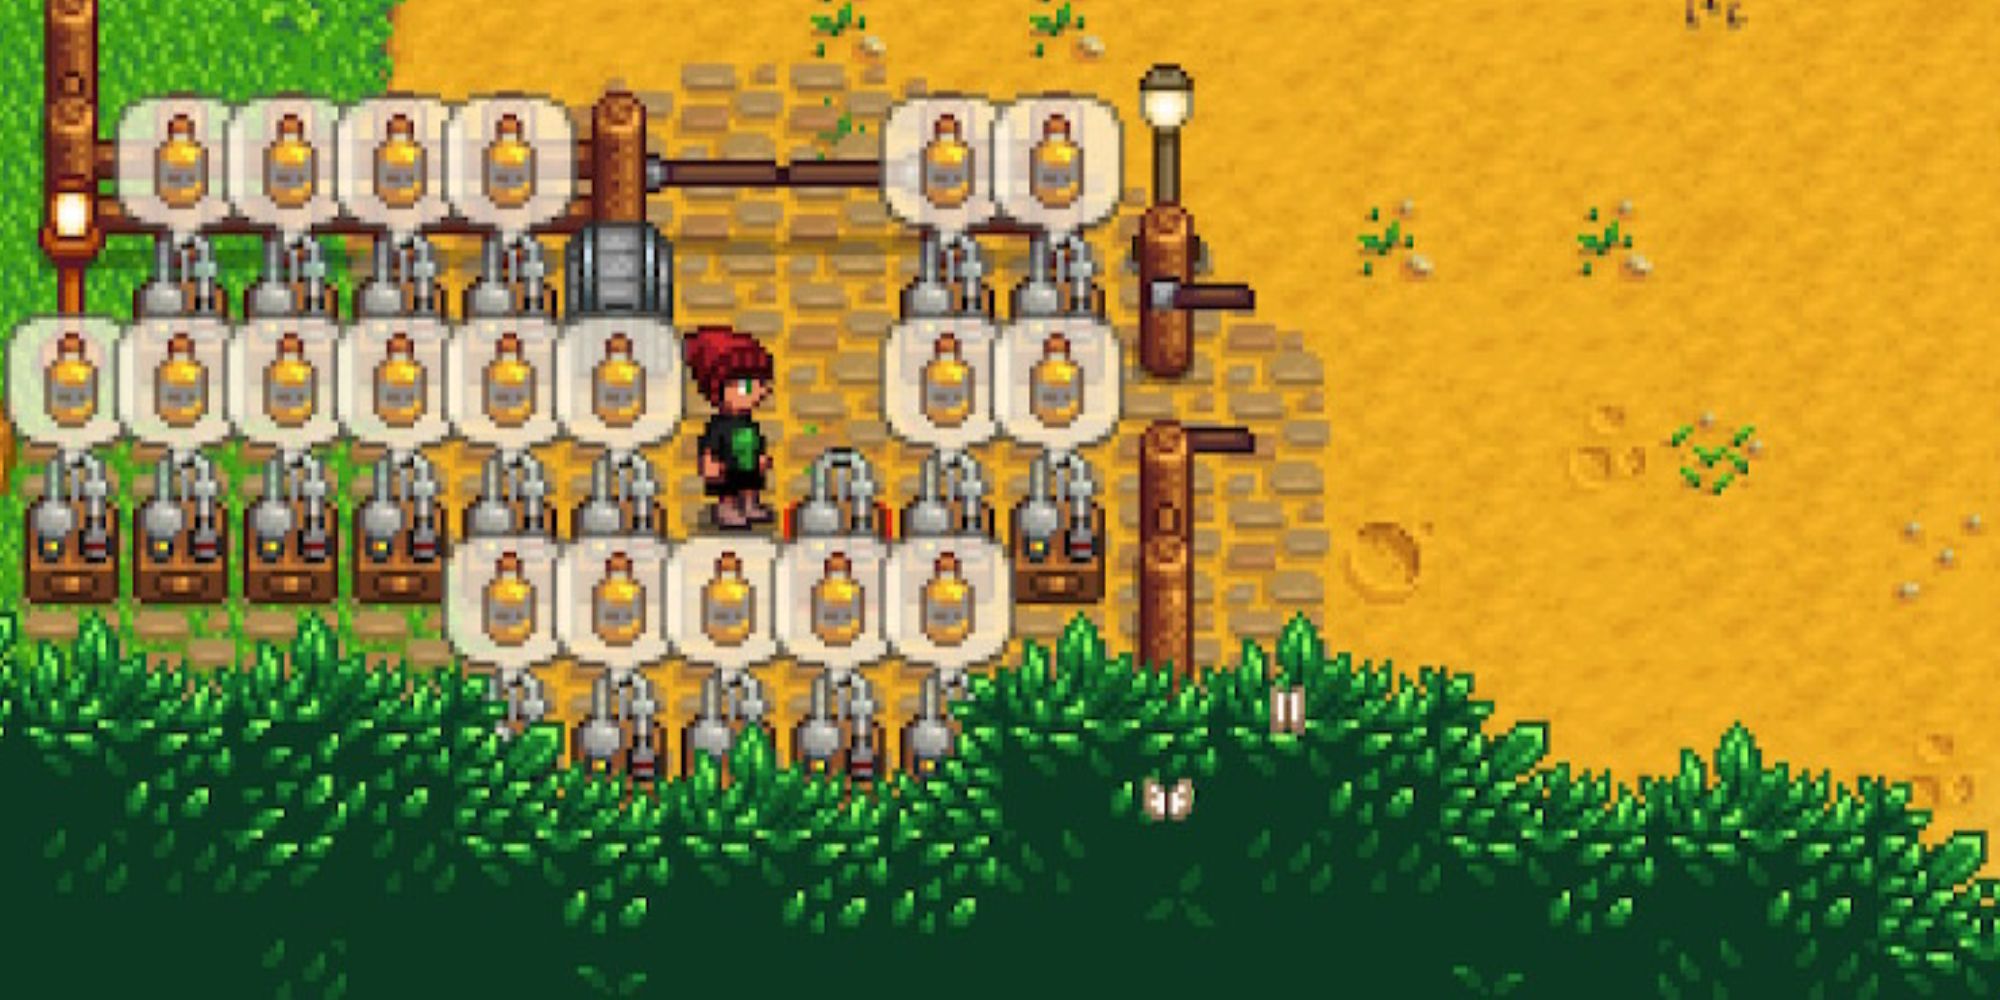 A farmer beside rows of Oil Makers producing Truffle Oil in Stardew Valley